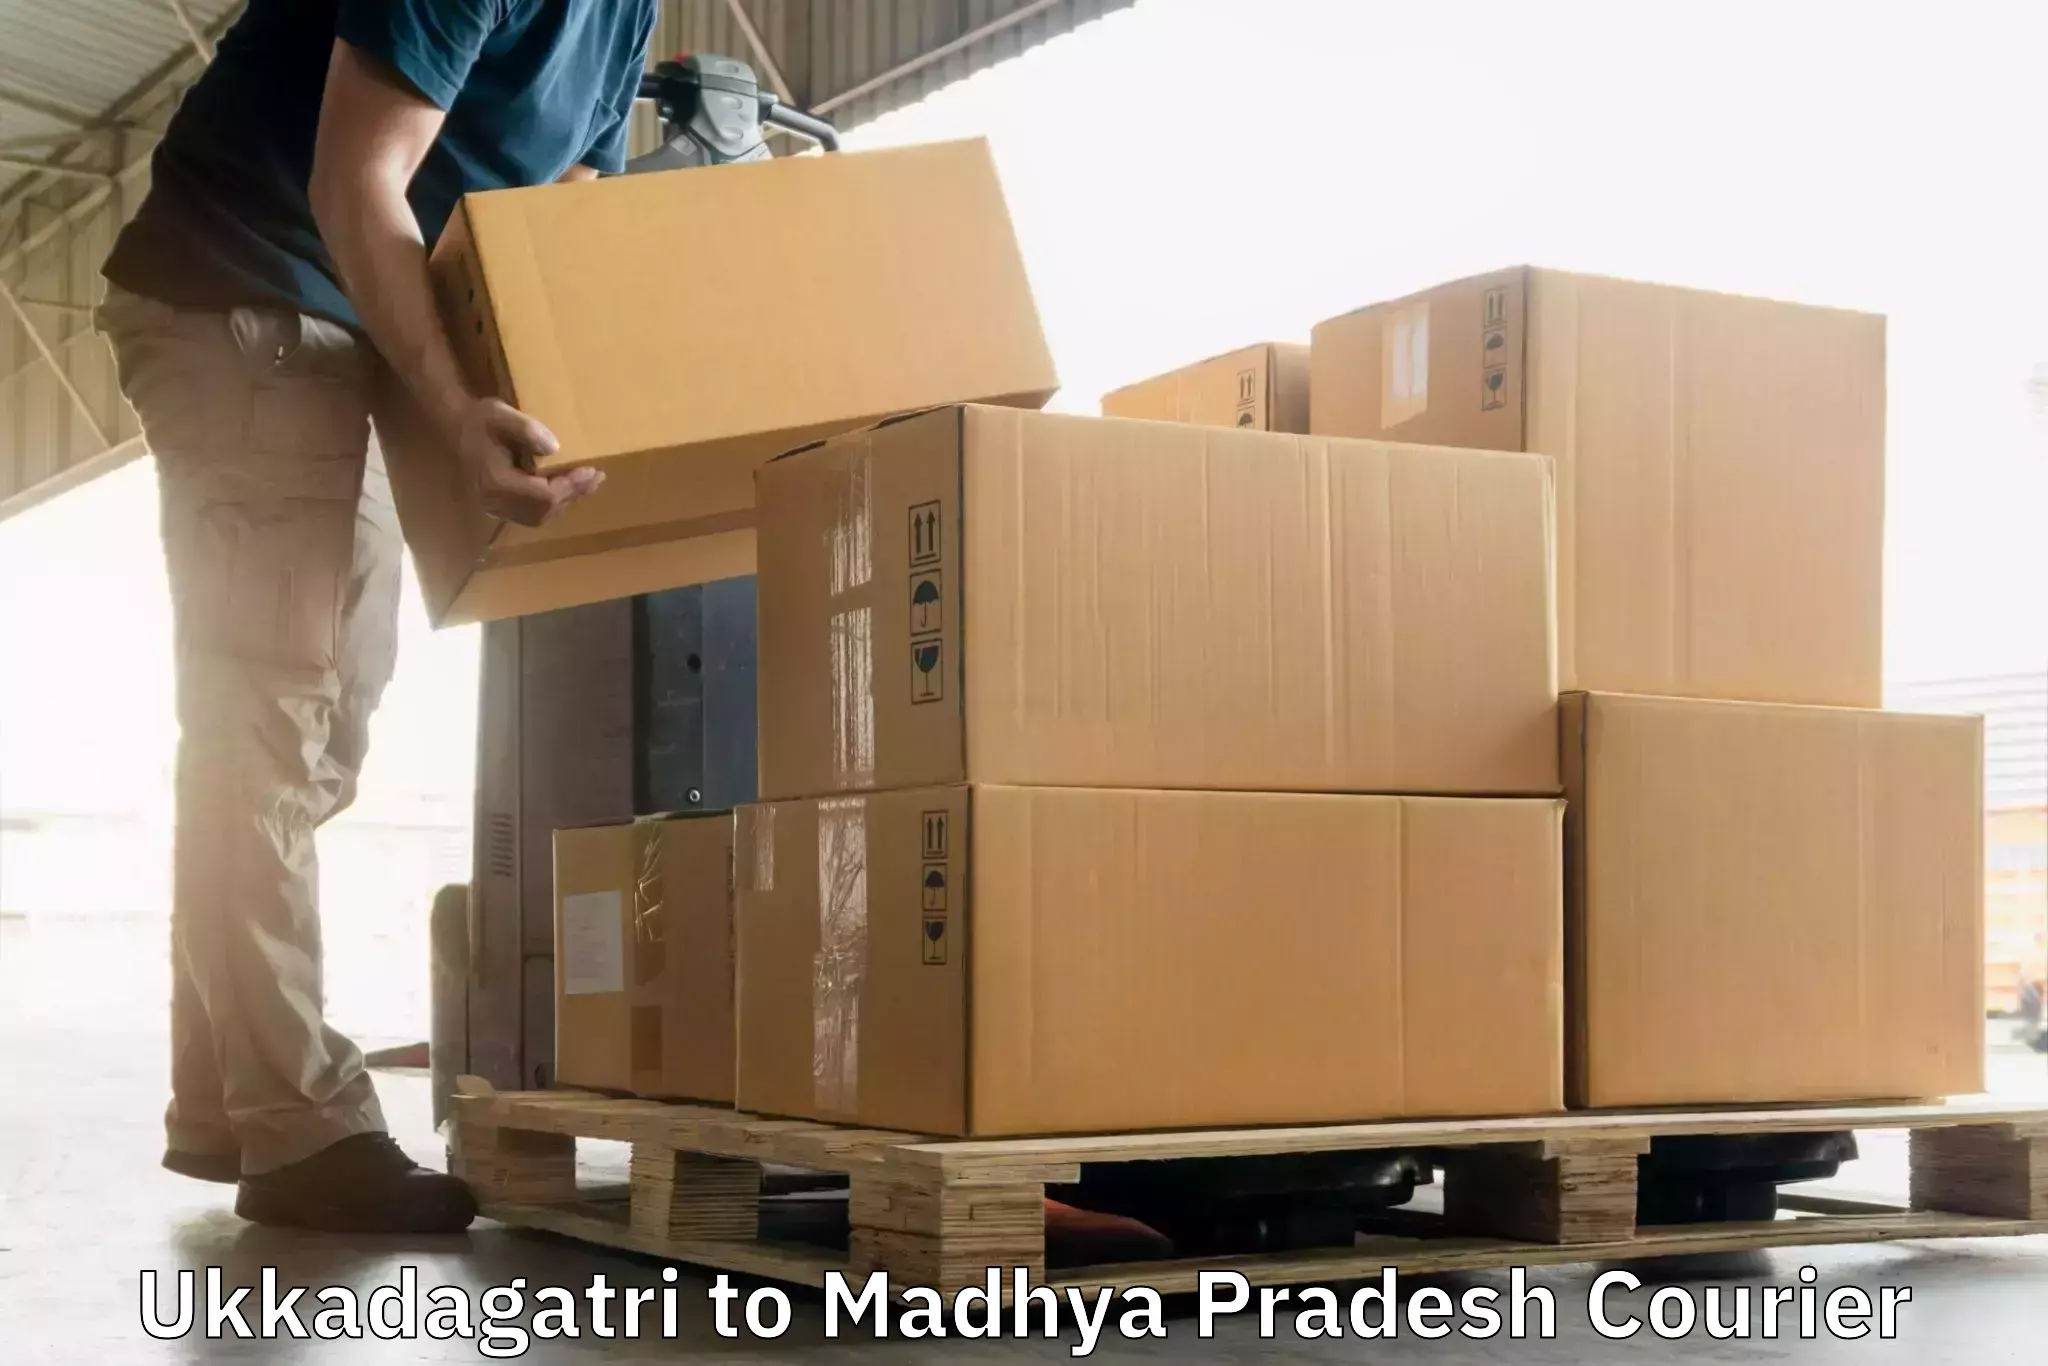 Smart parcel delivery in Ukkadagatri to Sheopur